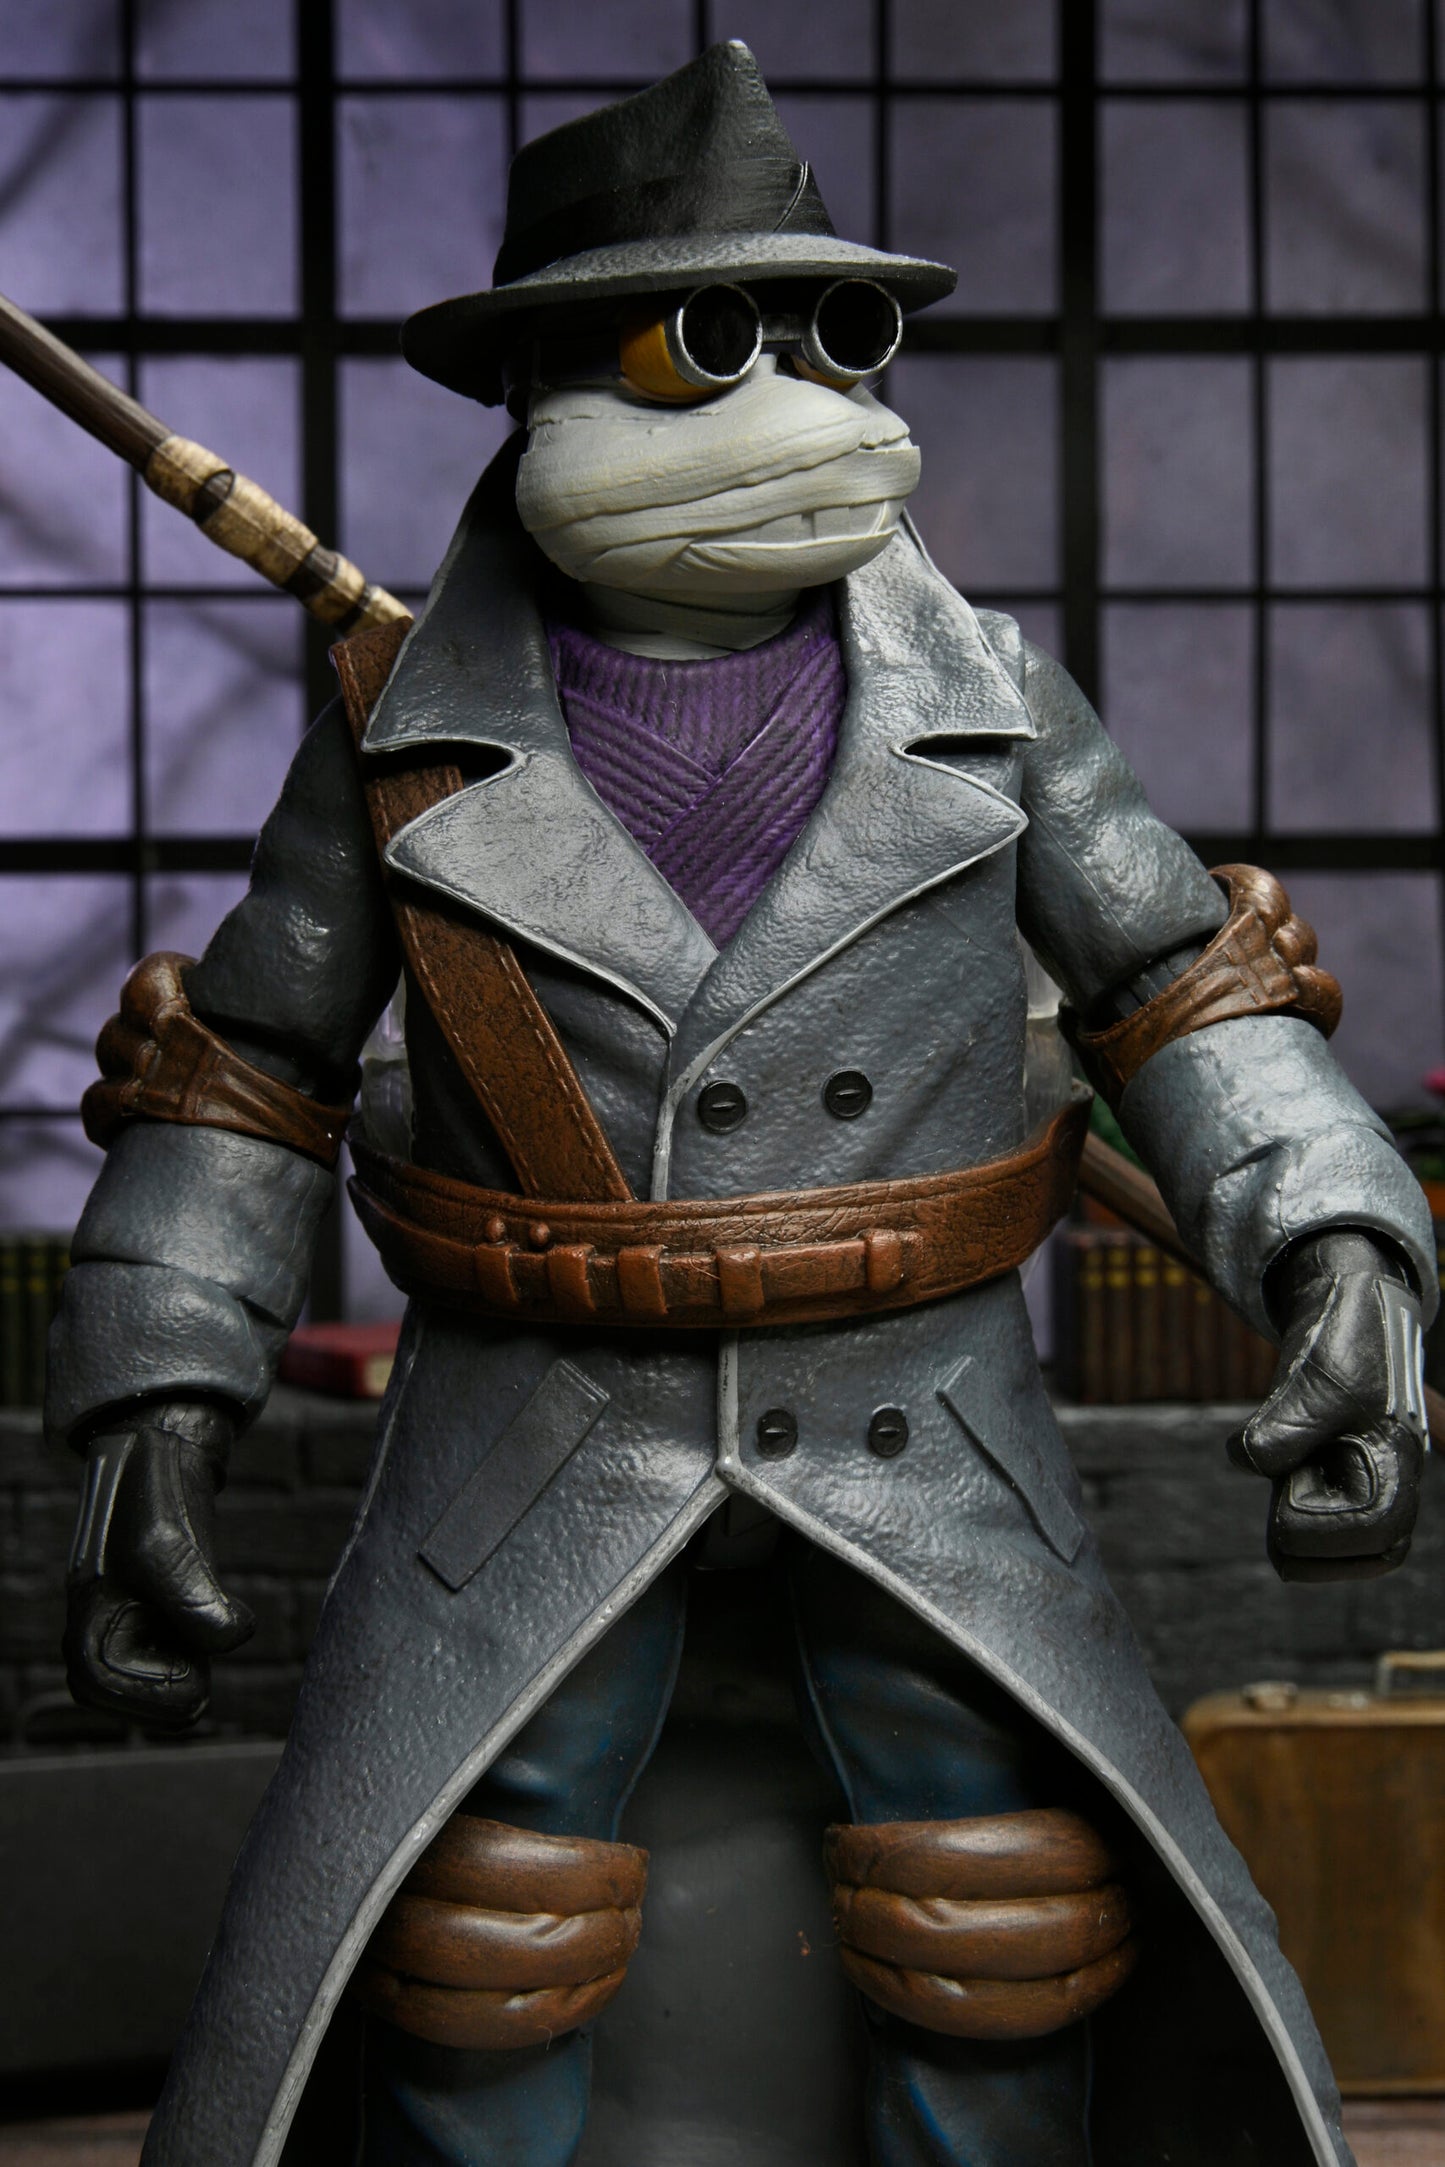 Universal Monsters x Teenage Mutant Ninja Turtles - 7″ Scale Action Figure – Ultimate Donatello as The Invisible Man